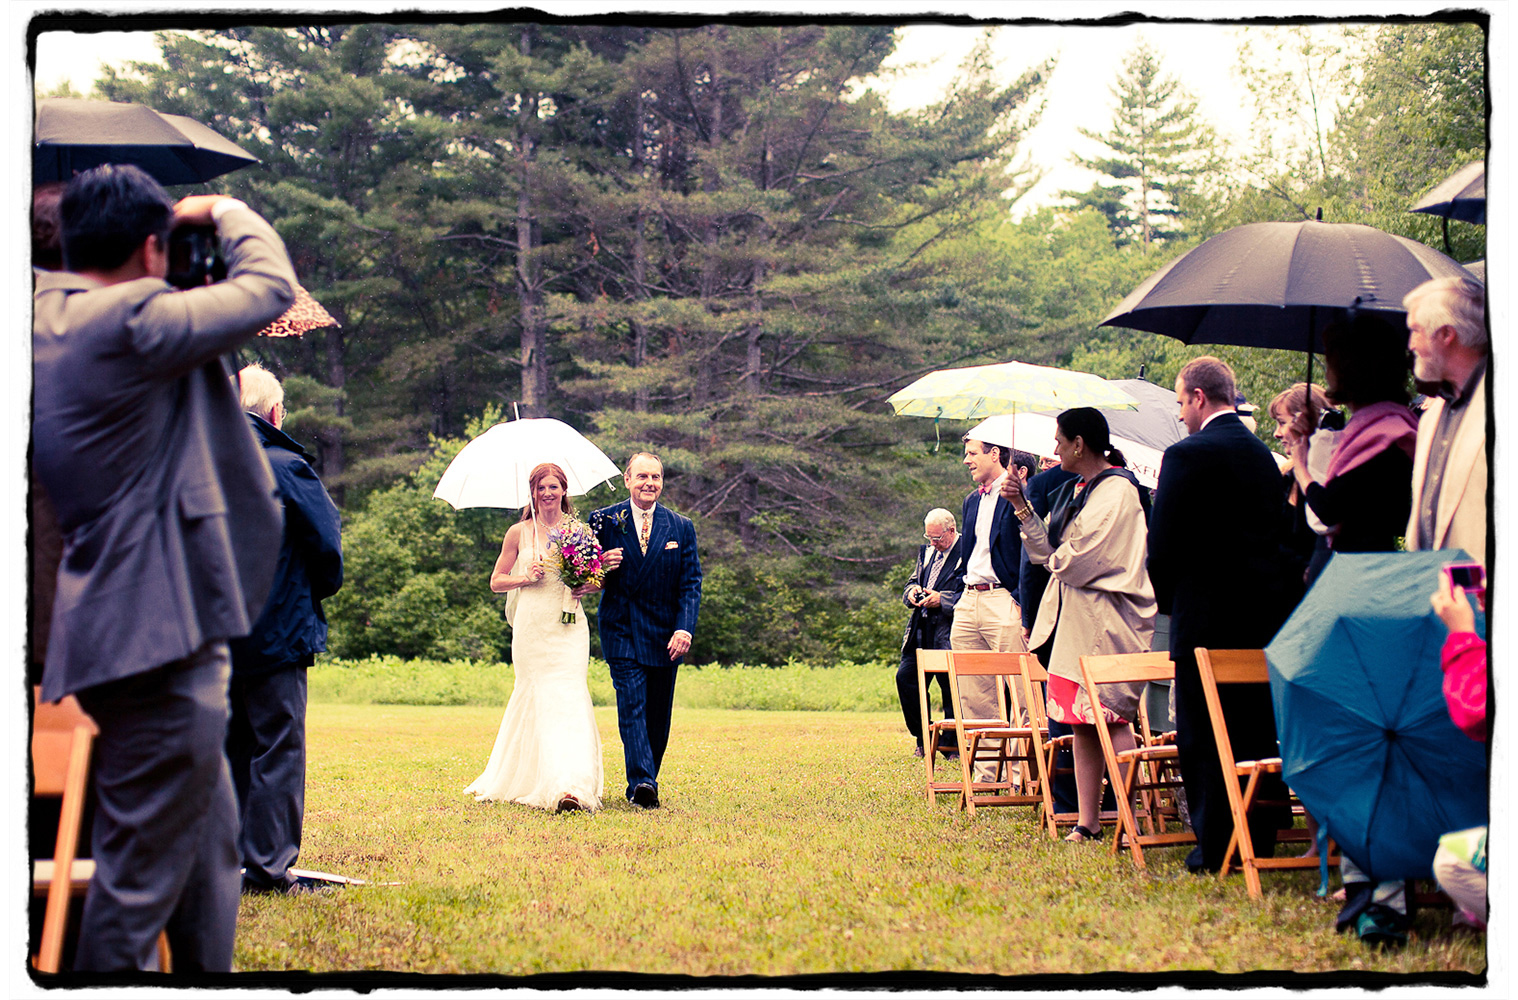 Rain couldn't stop this couple from having their ceremony in the great outdoors.